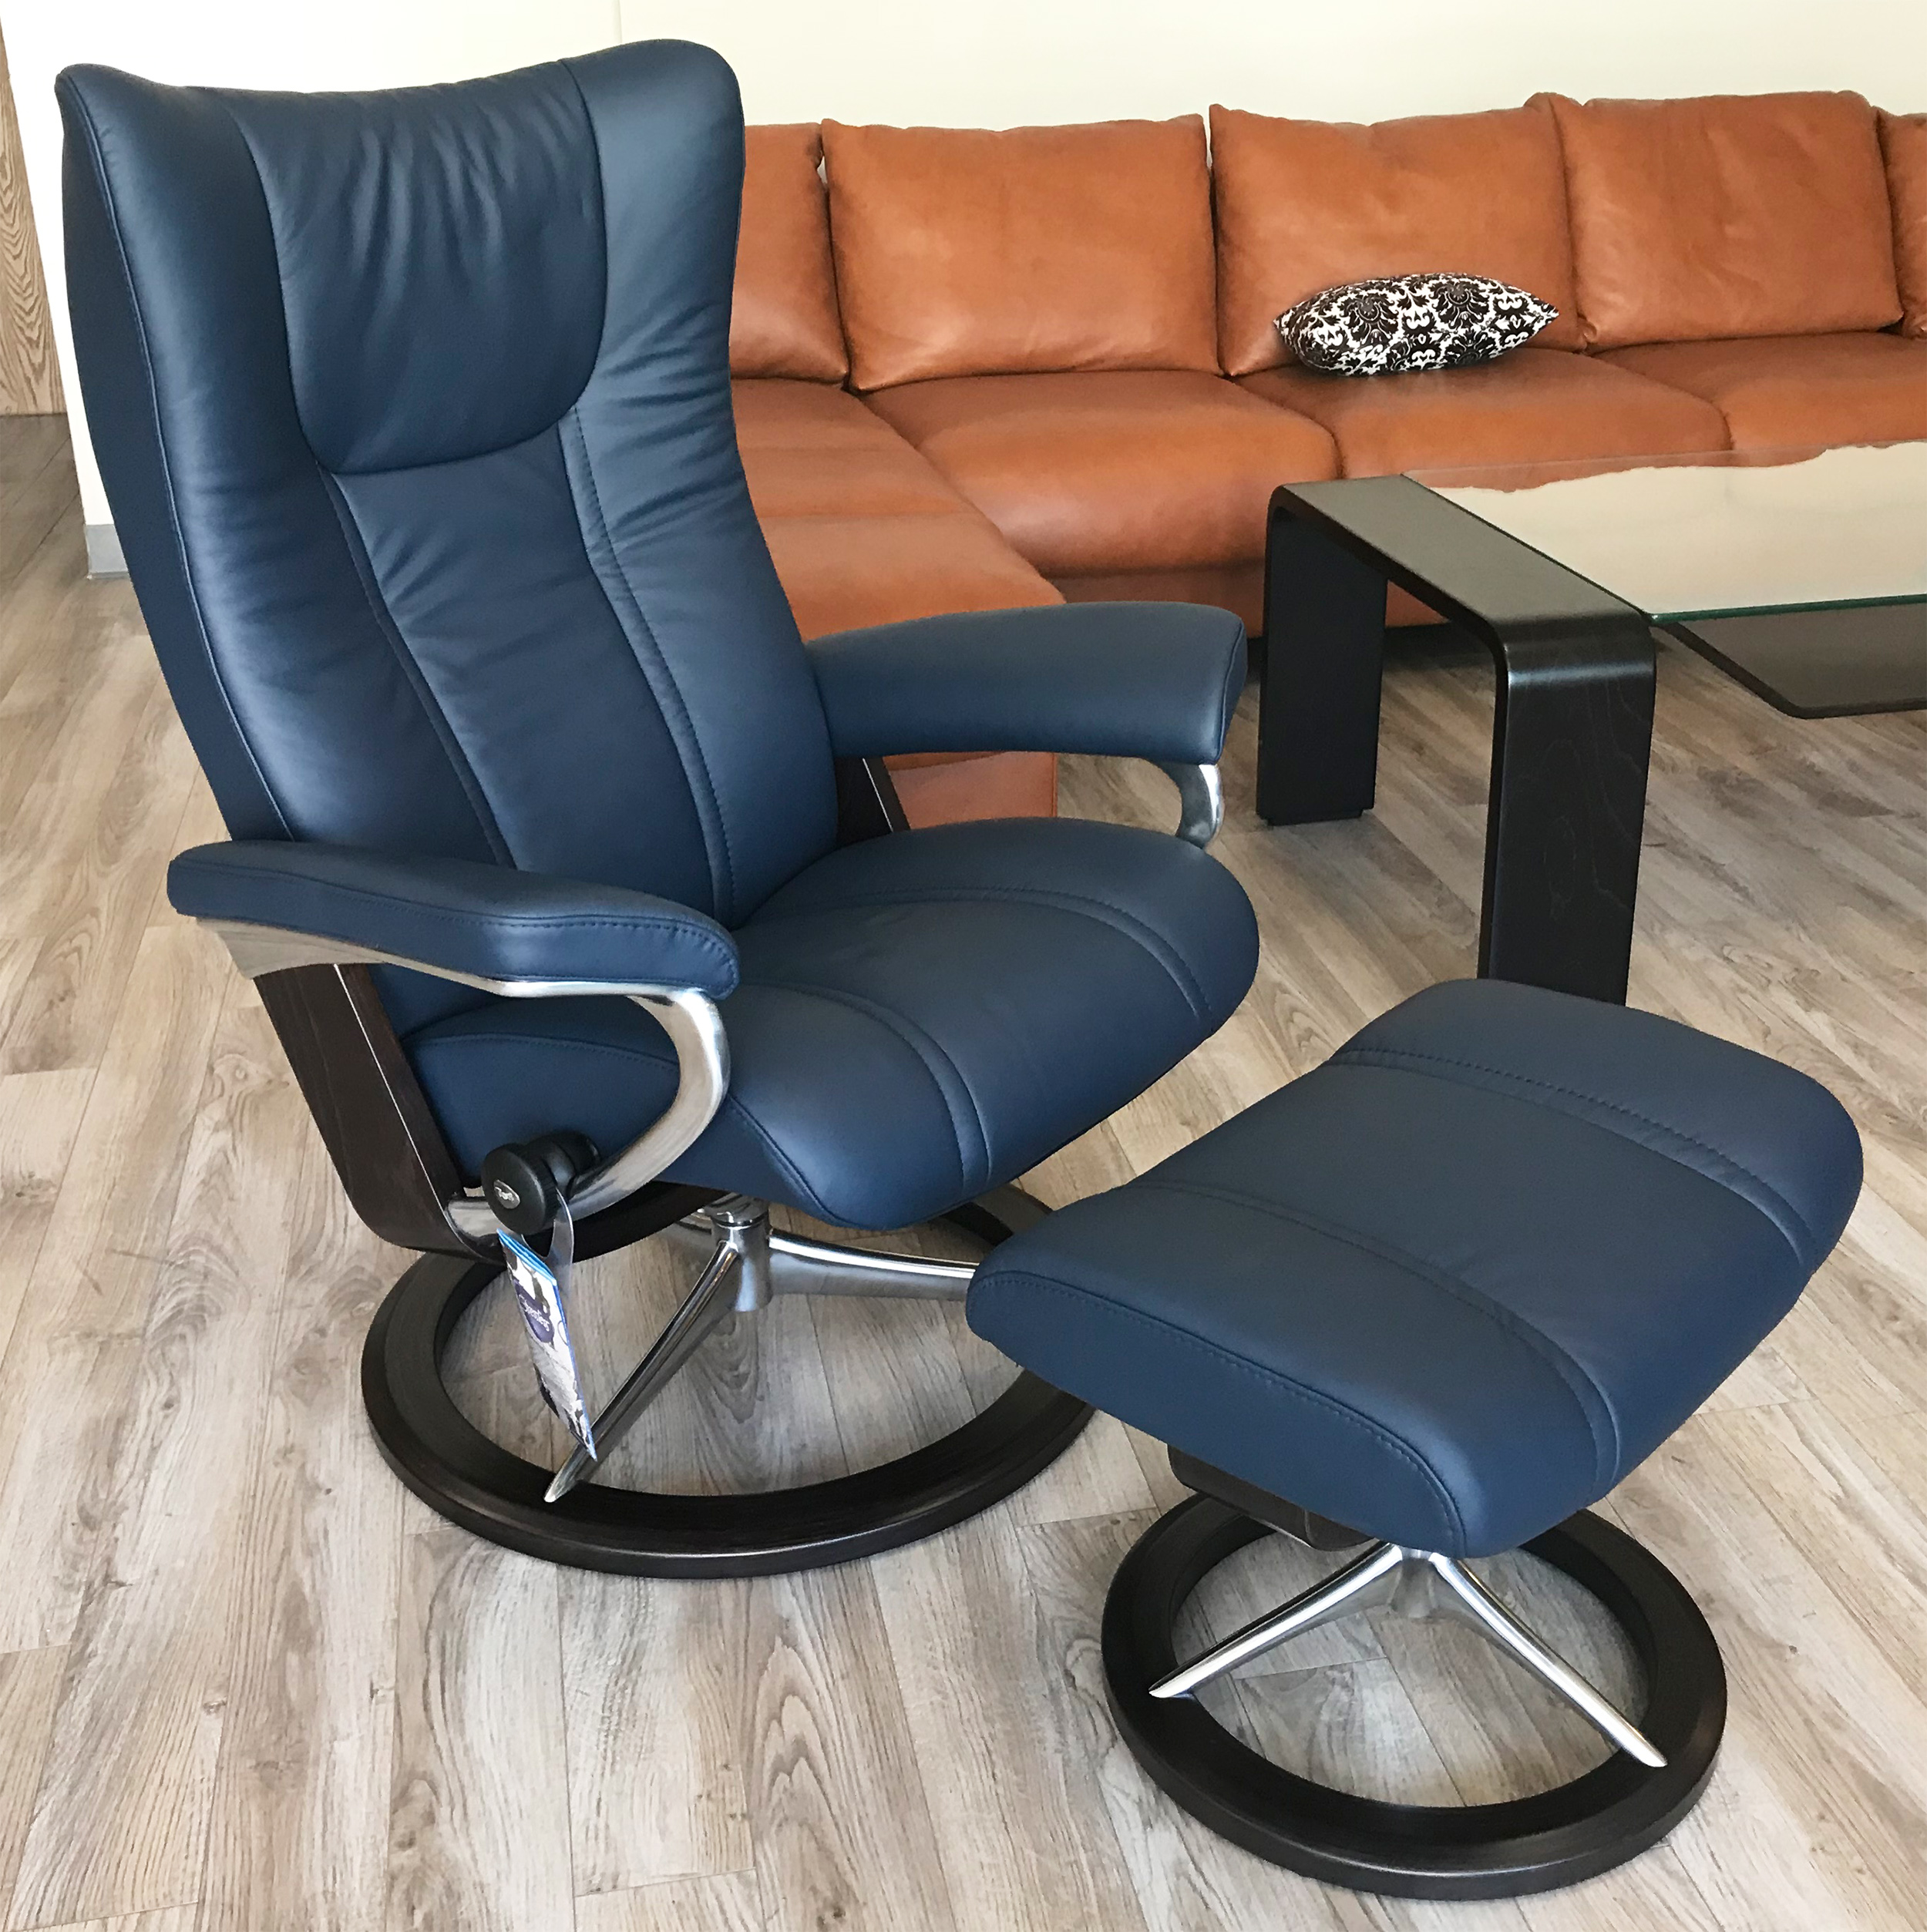 Stressless Mayfair Paloma Oxford Blue Leather Recliner Chair and Ottoman by Ekornes Stressless